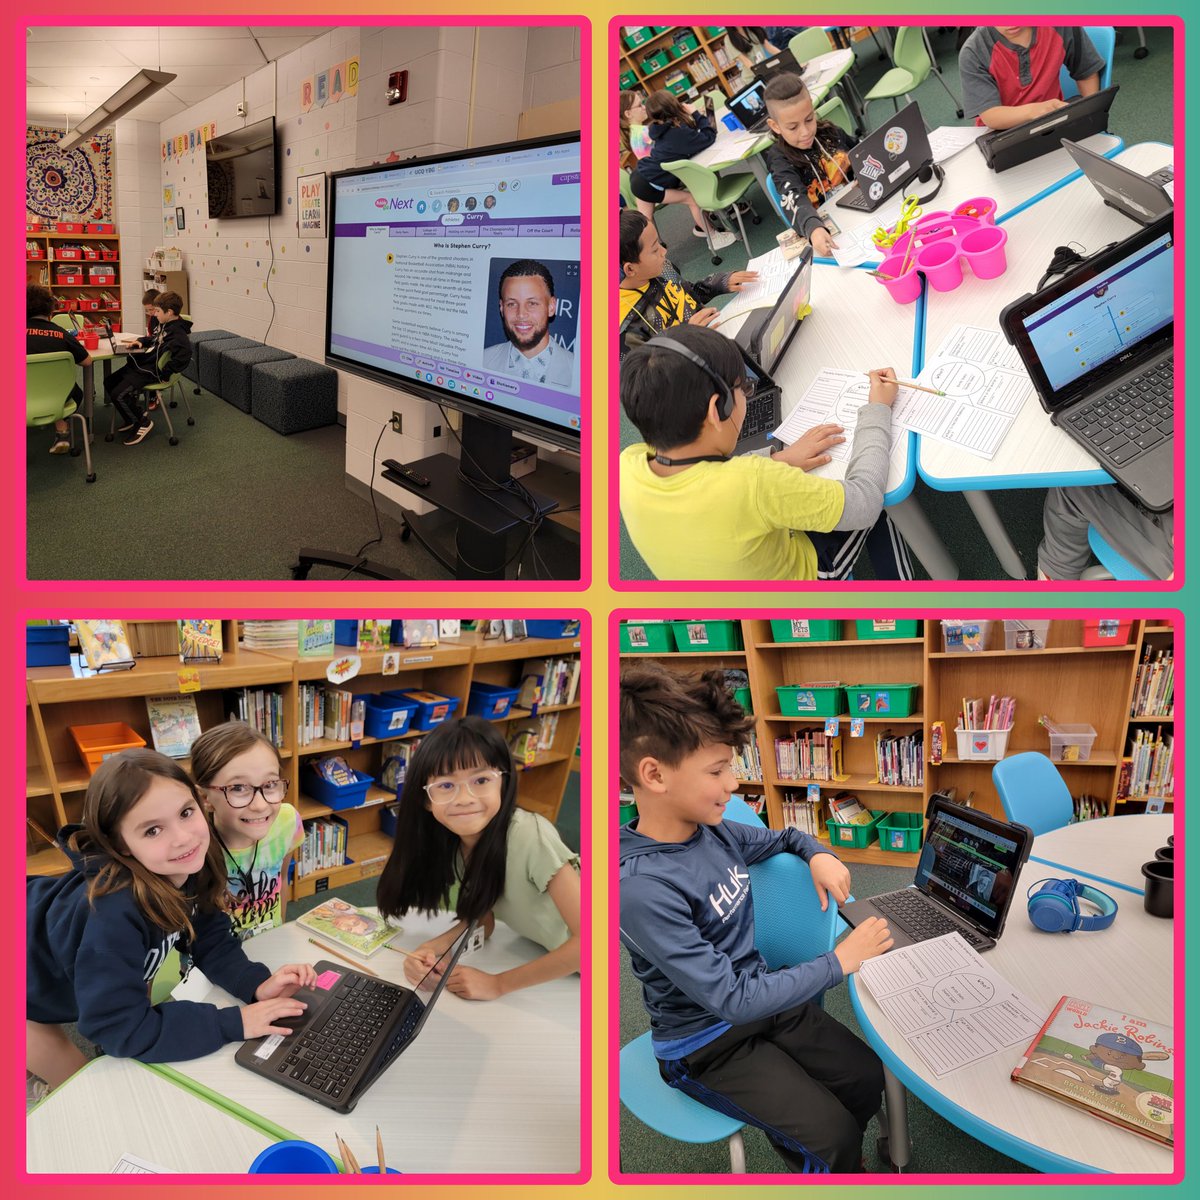 3rd graders enjoyed exploring our biography section and PebbleGo Next app to browse a wide variety of people to research. Loved seeing the people they chose!